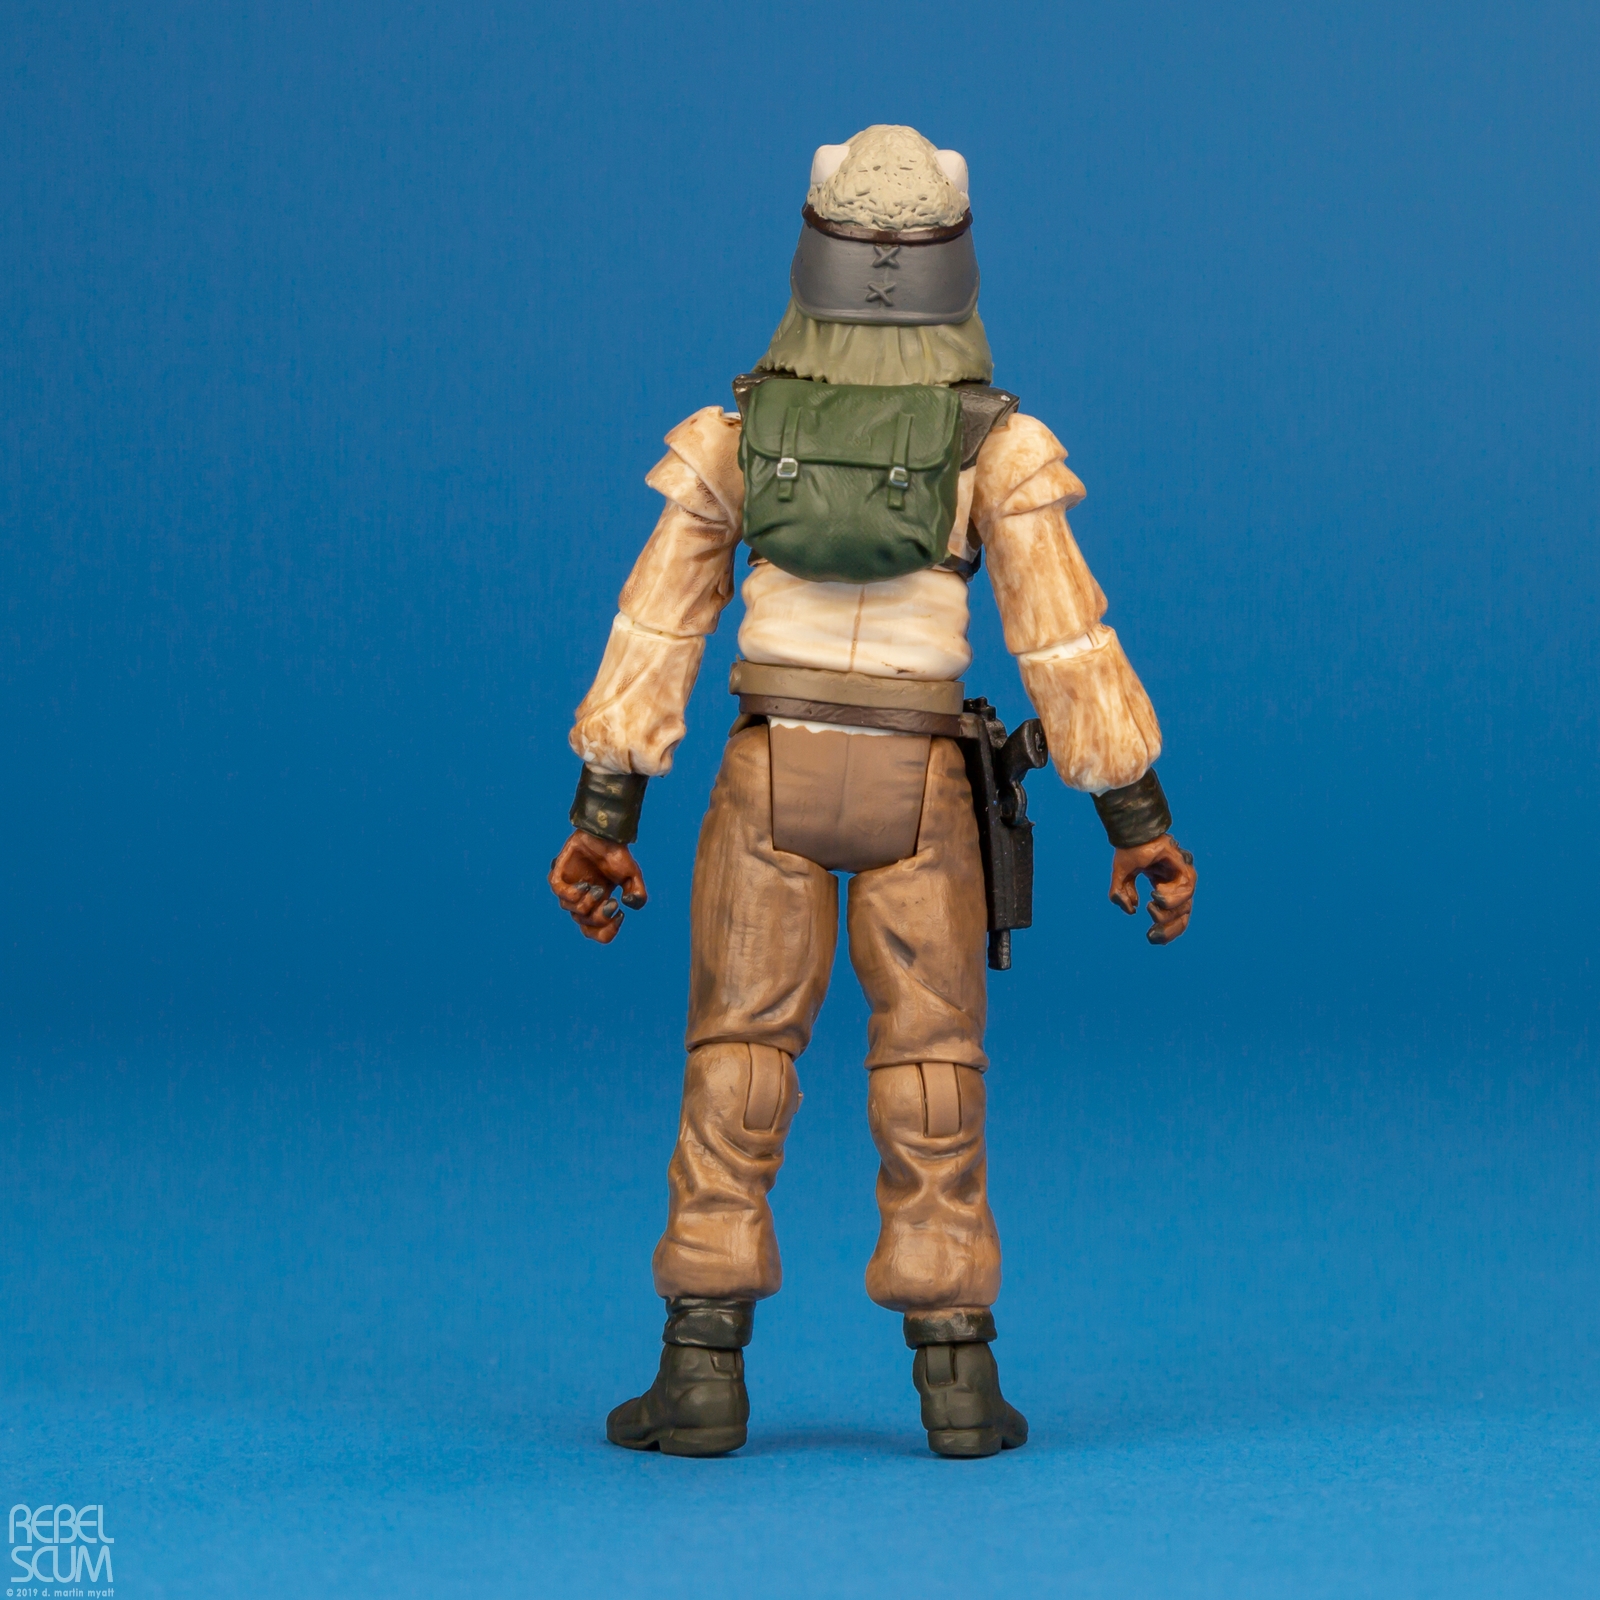 Special-3-Action-Figures-Set-The-Vintage-Collection-008.jpg